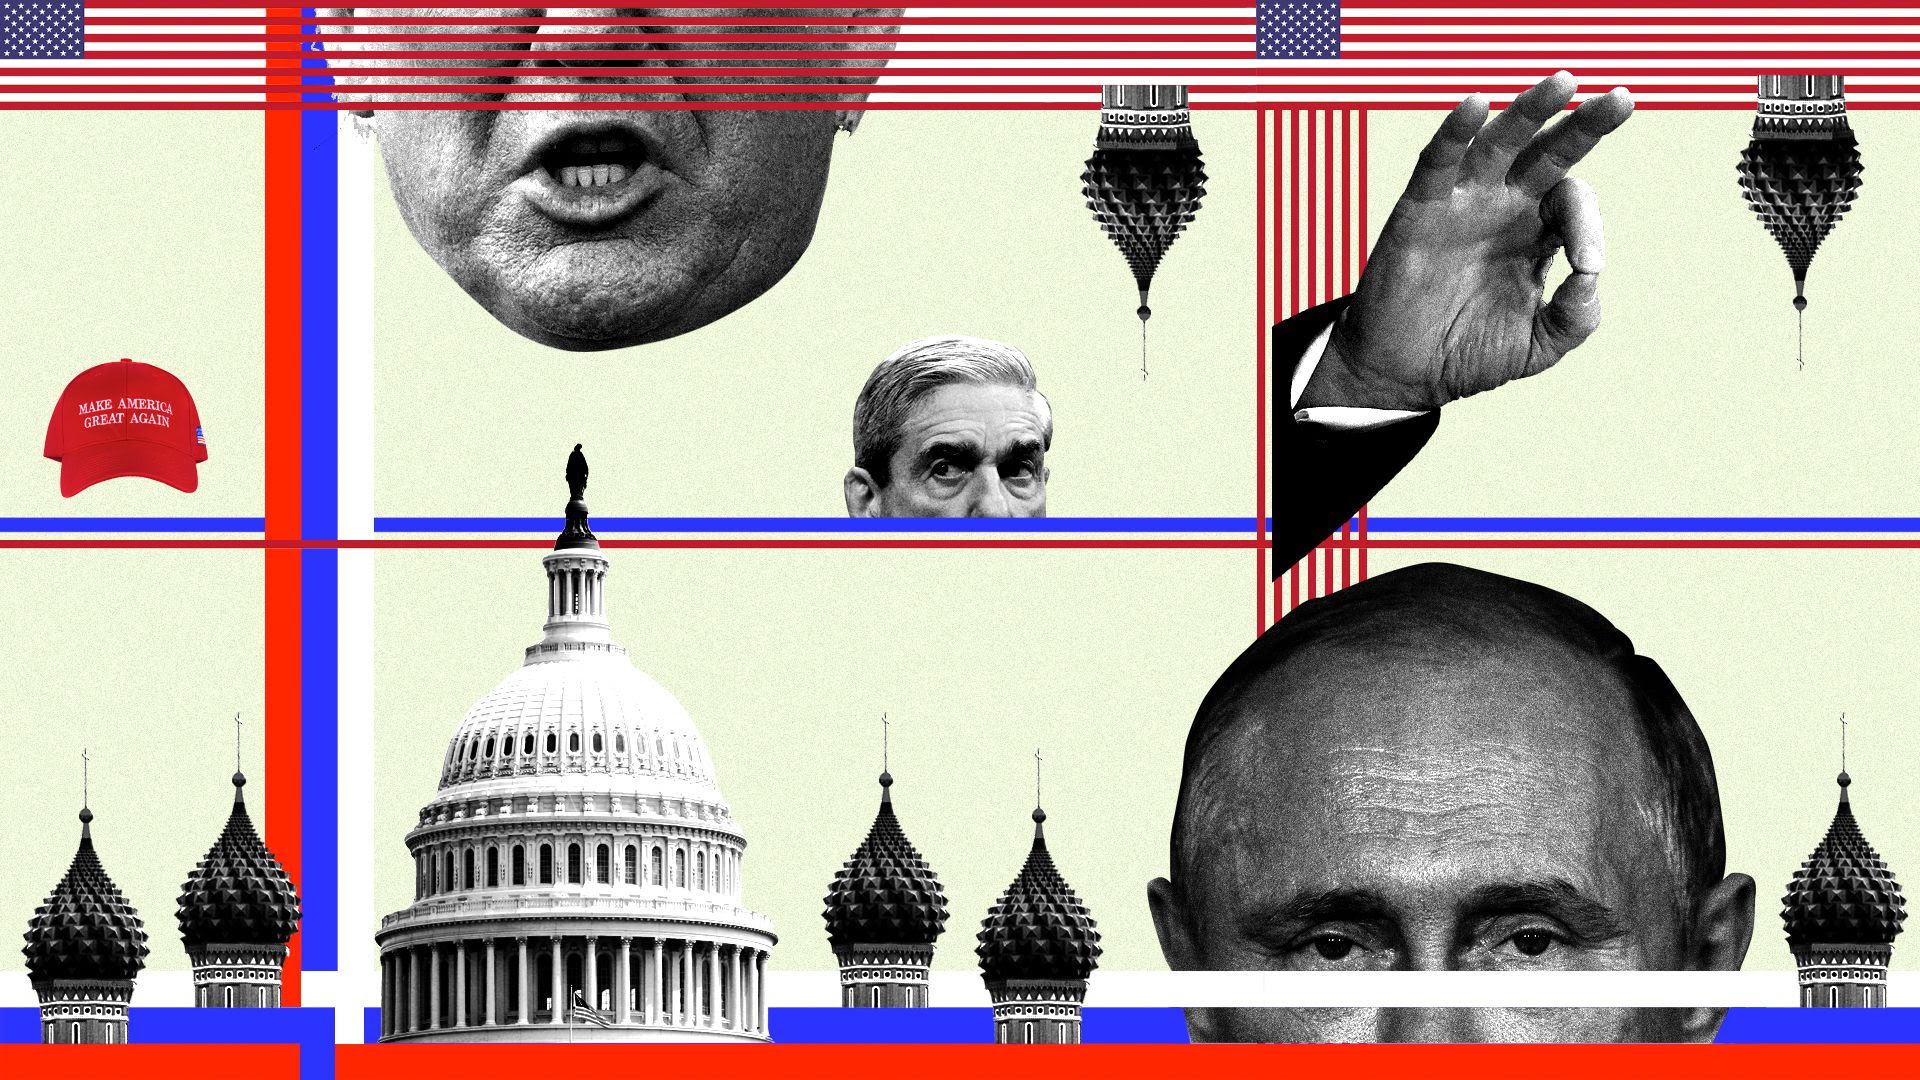 This illustration includes the faces of Trump, Mueller and Putin, in addition to to other stuff